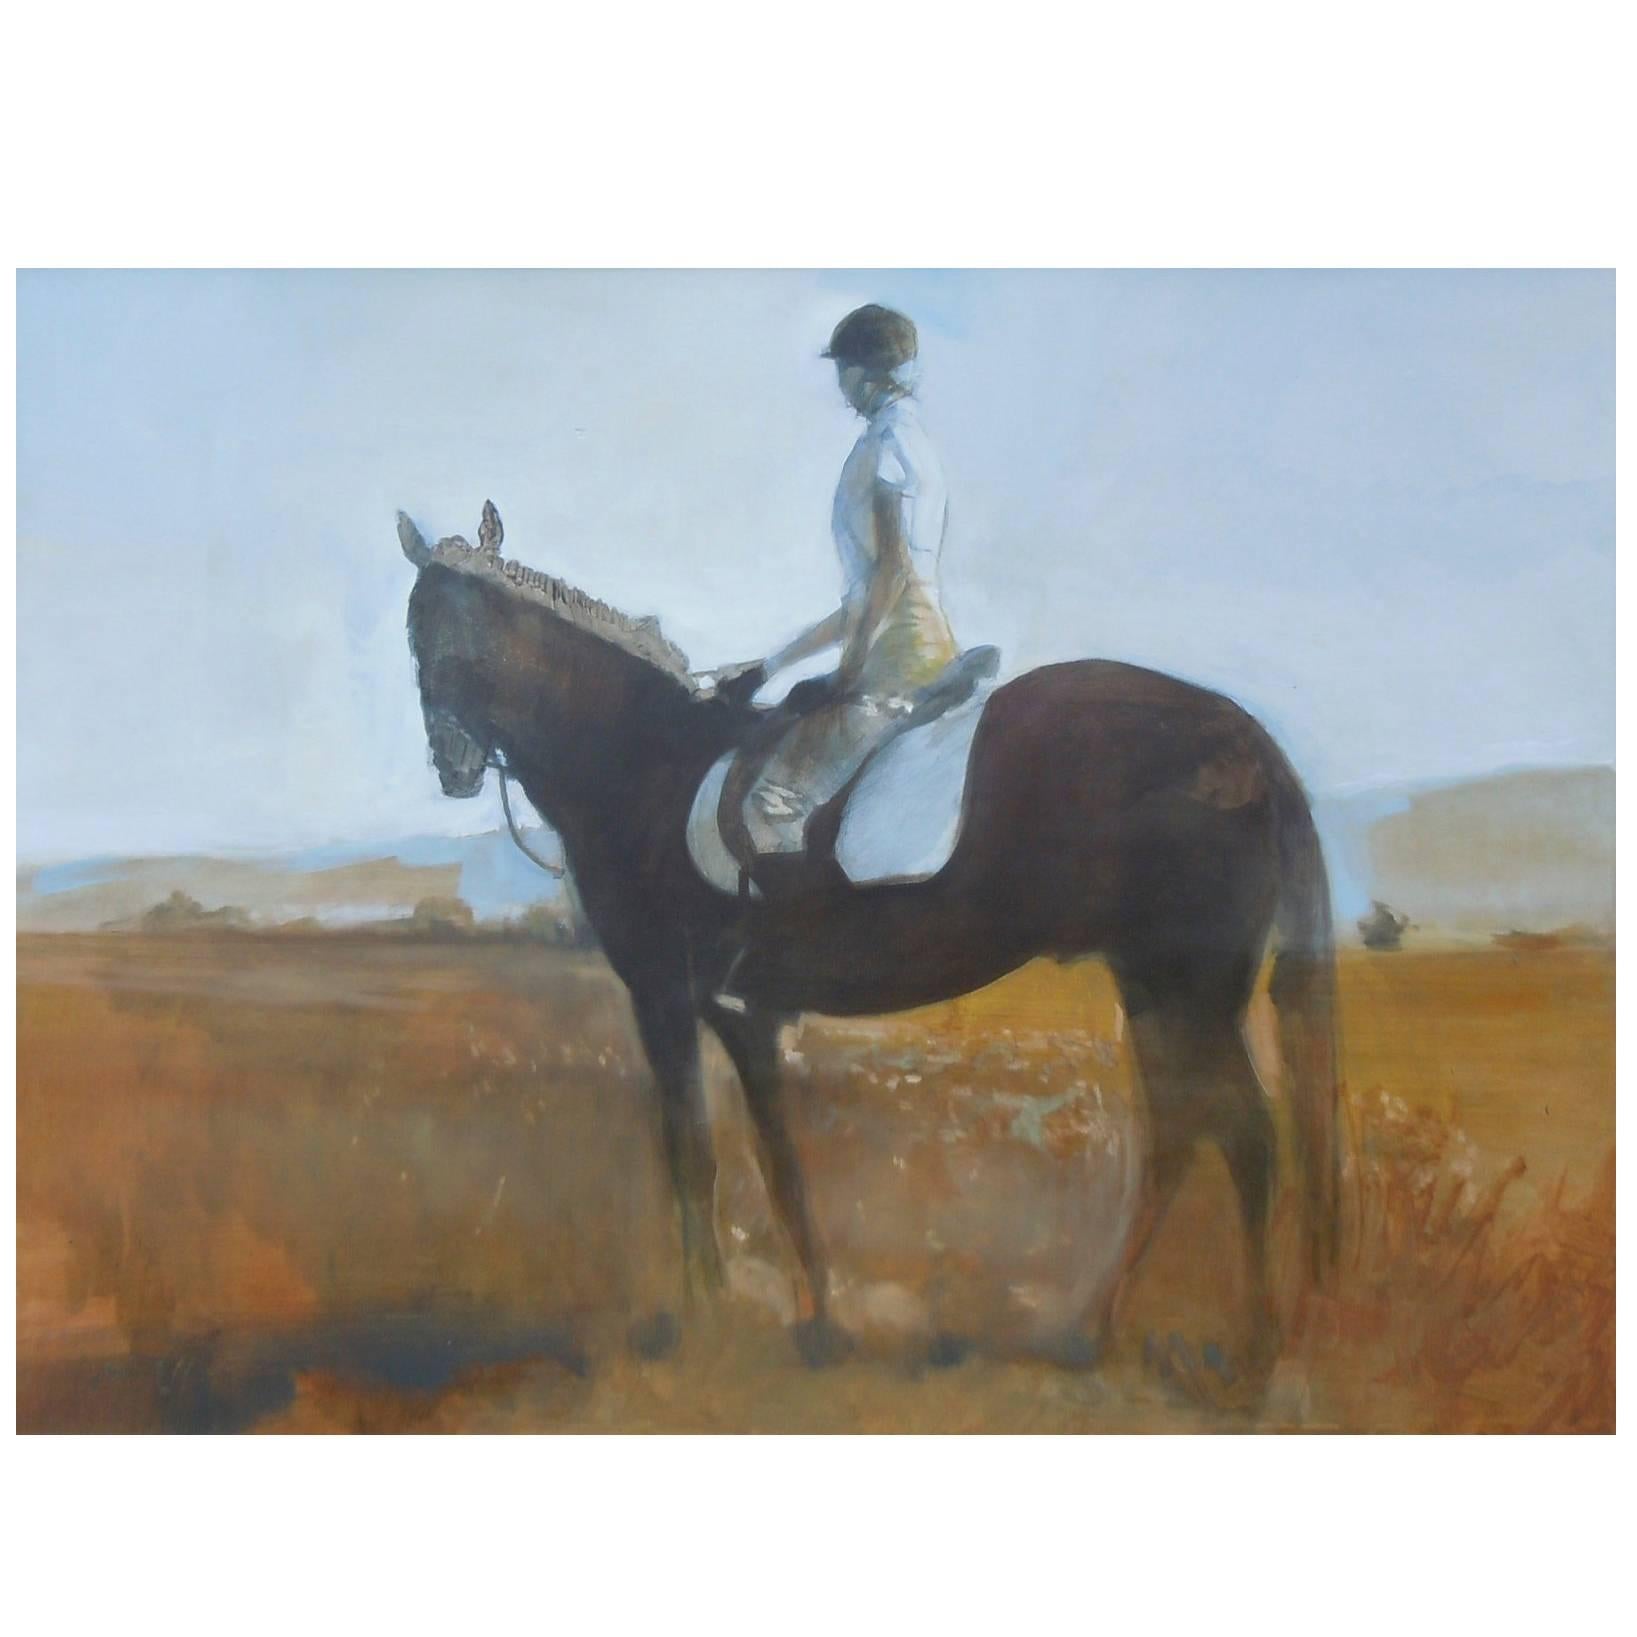 Steve Smith, "Beaumont", 2008, Oil on Panel For Sale